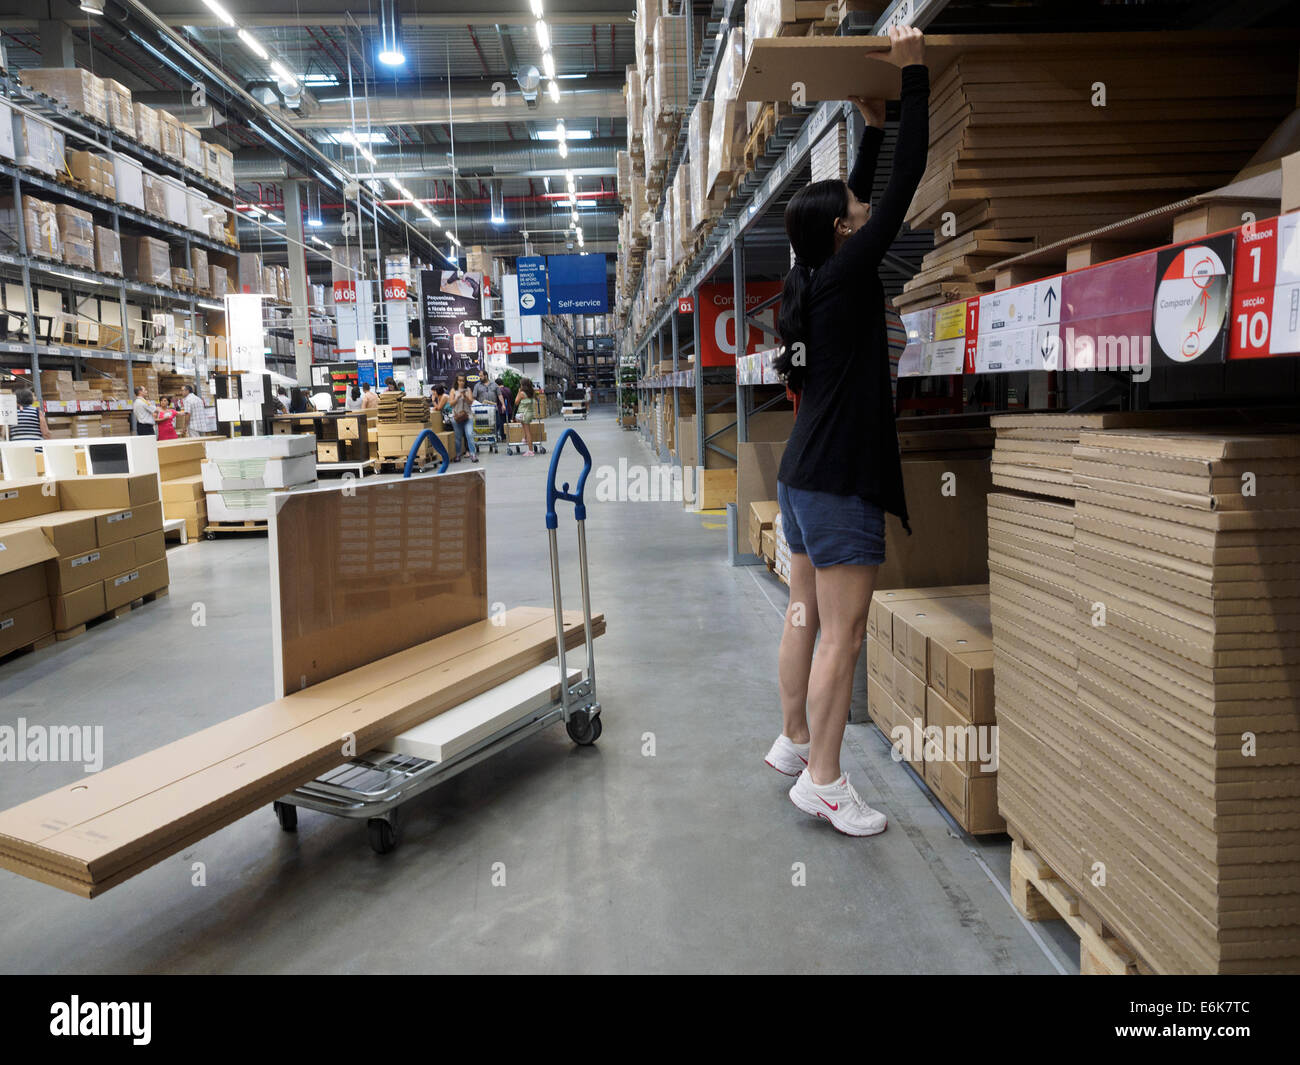 Customer picking up furniture at the Ikea store warehouse Stock Photo -  Alamy